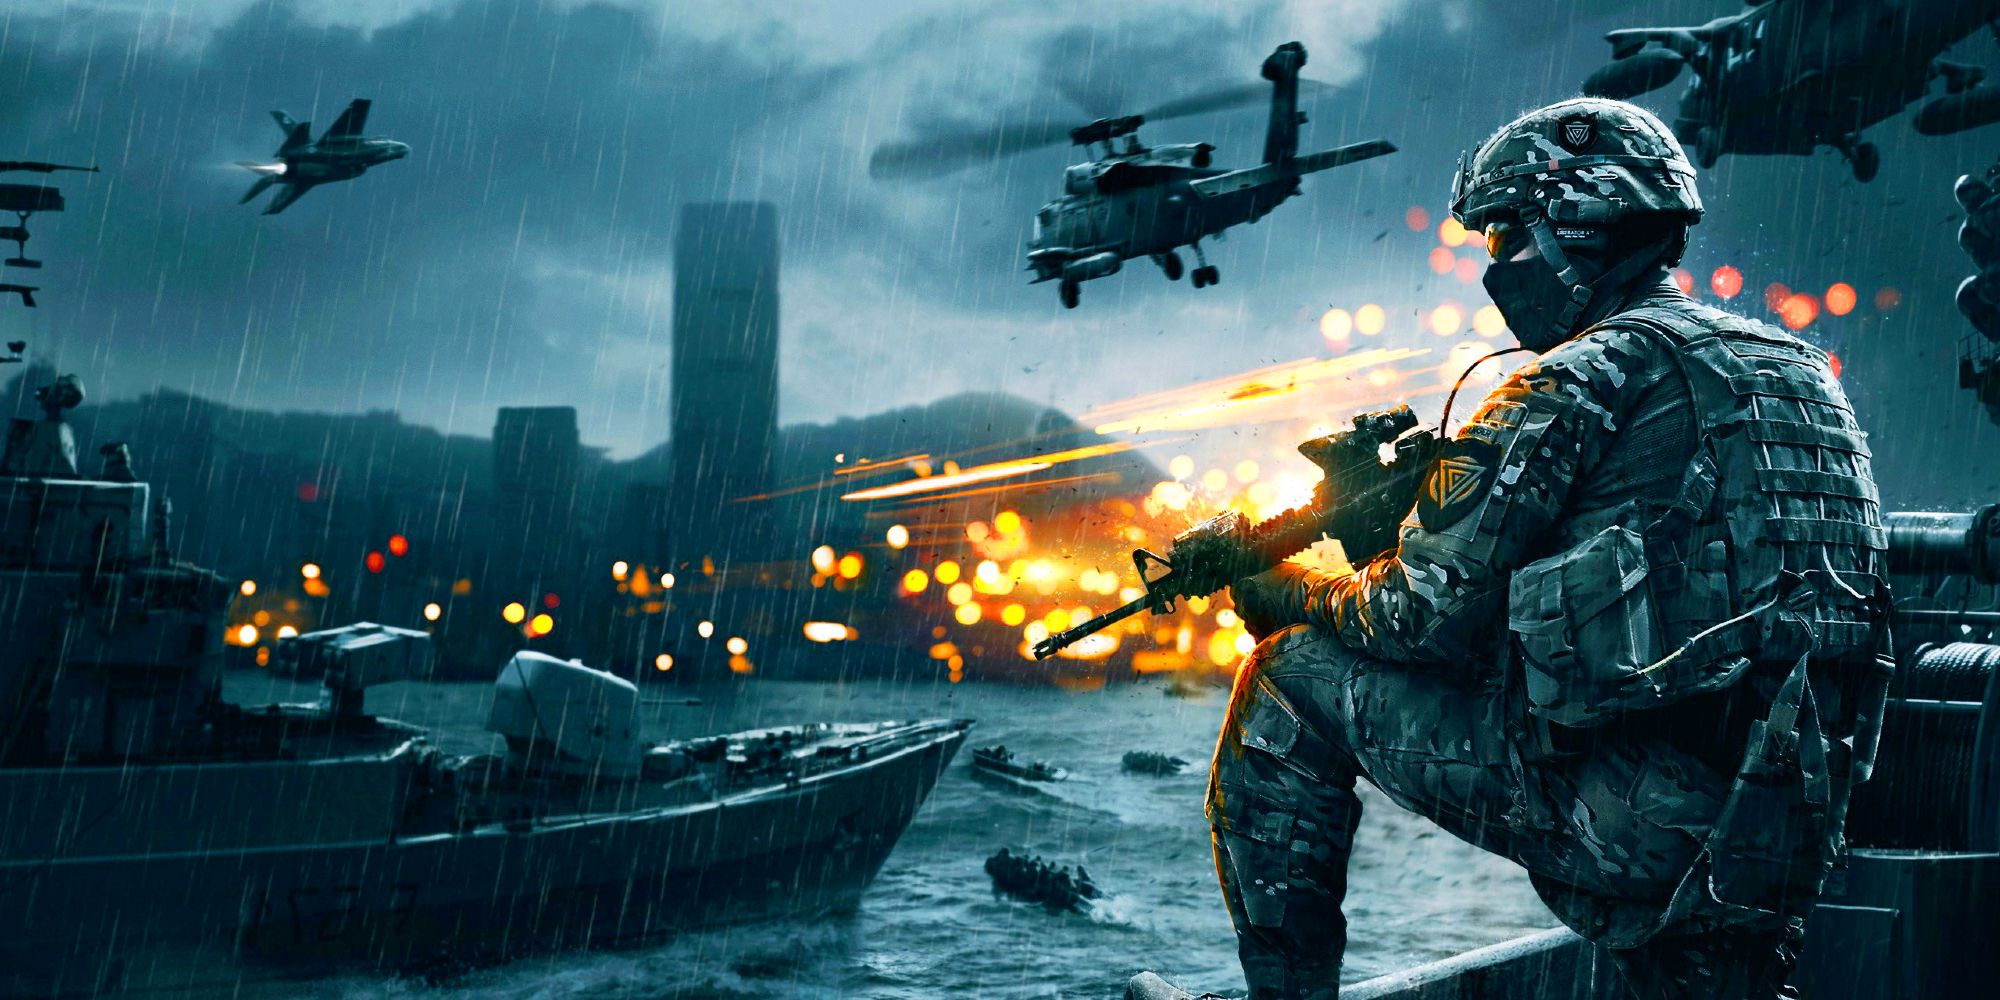 Battlefield 4 features 64-player multiplayer on Xbox One and PS4 - GameSpot